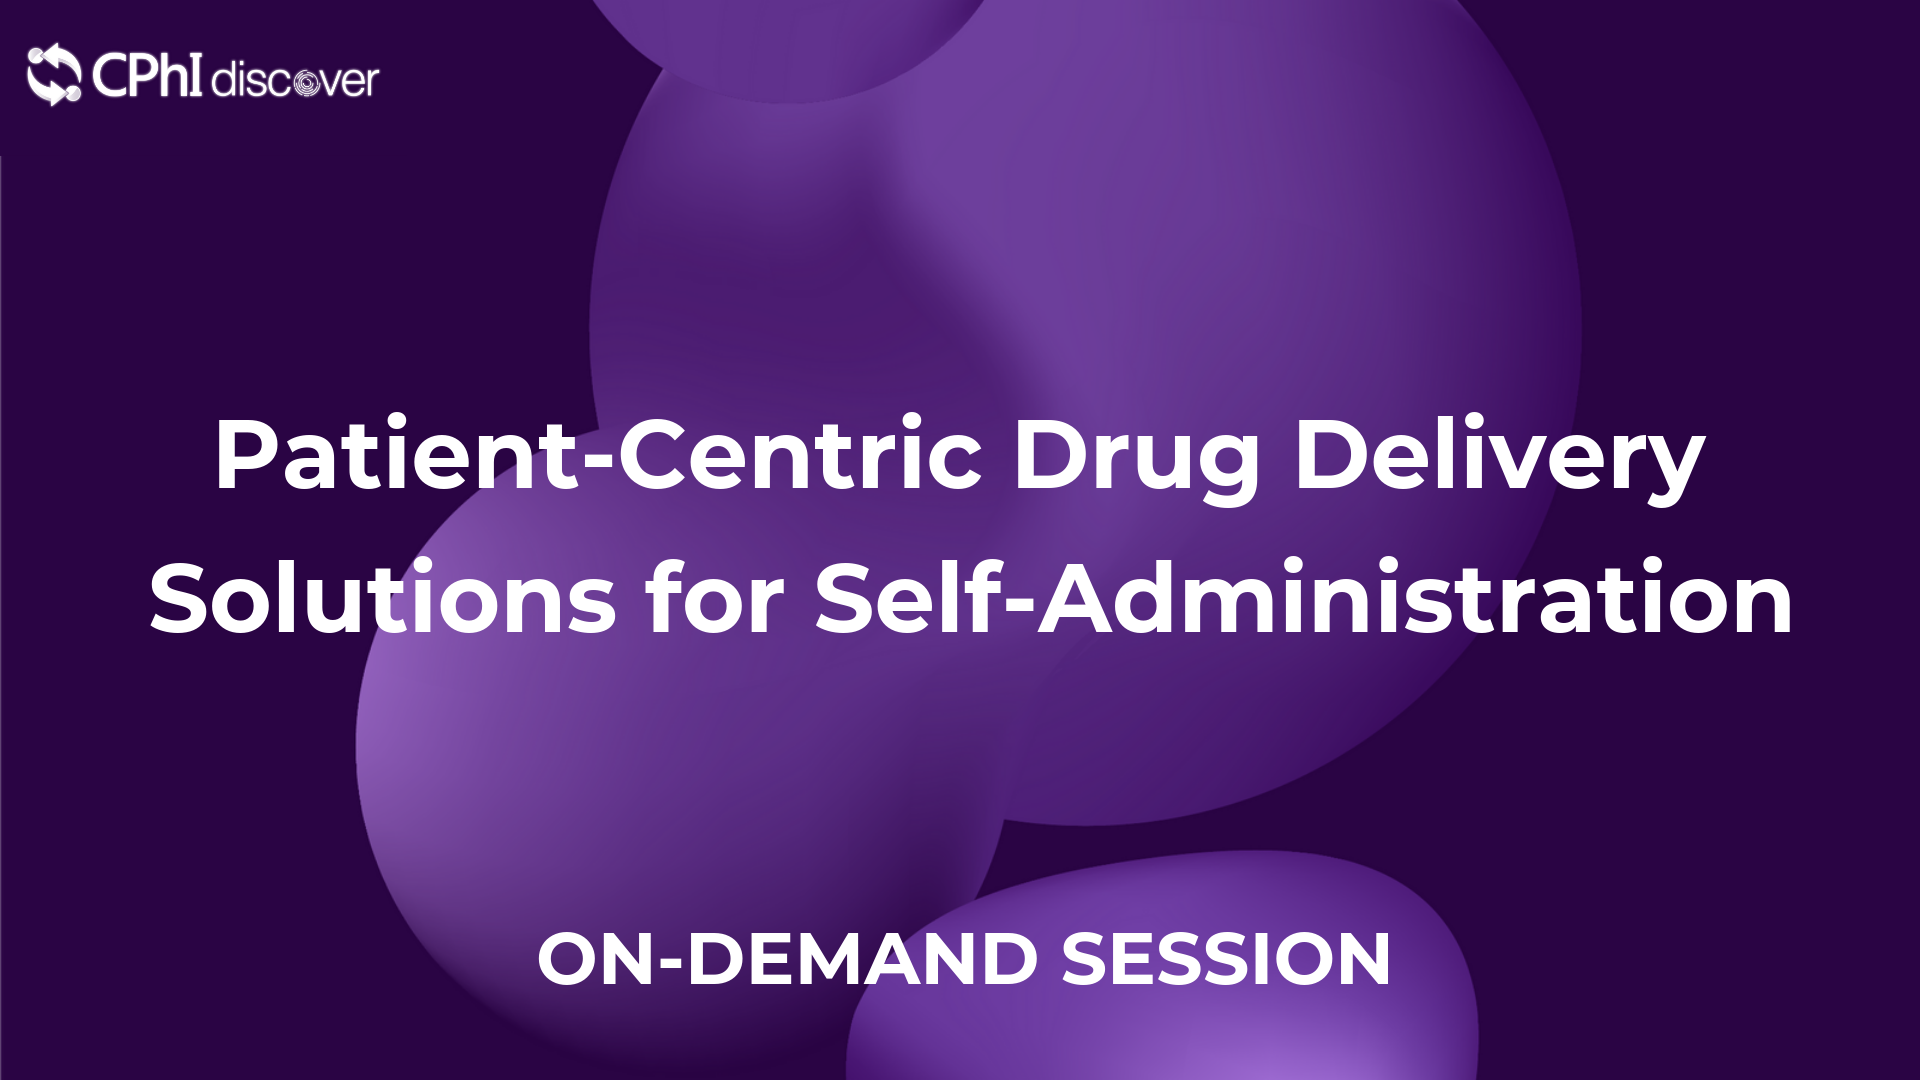 Patient-Centric Drug Delivery Solutions for Self-Administration